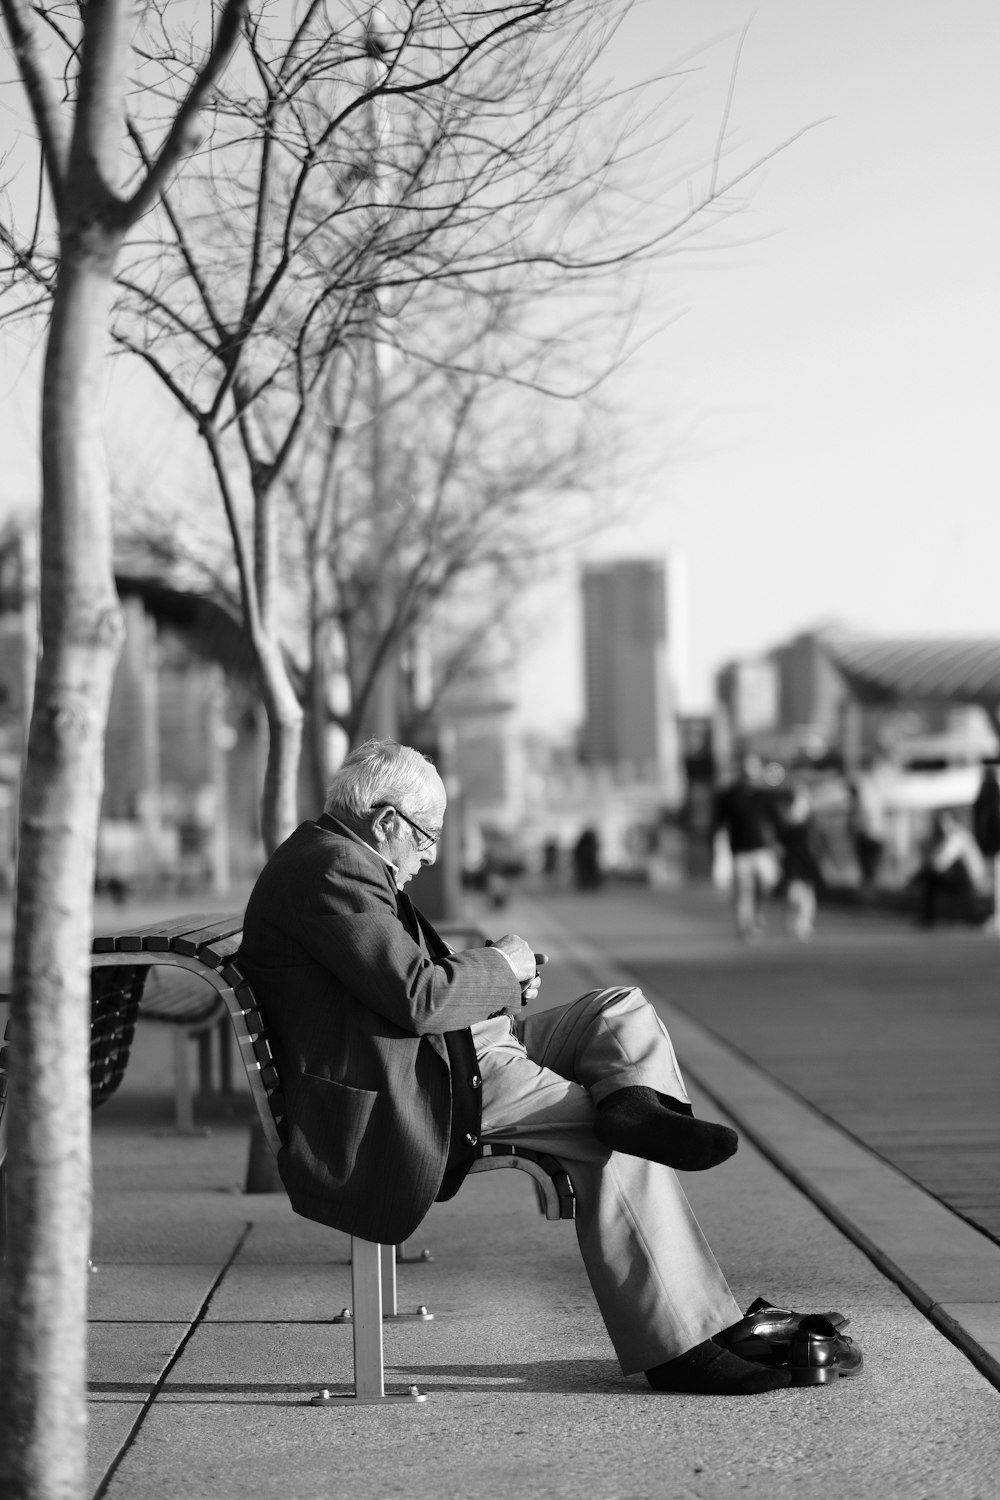 grayscale photo of man sitting on bench near bare trees